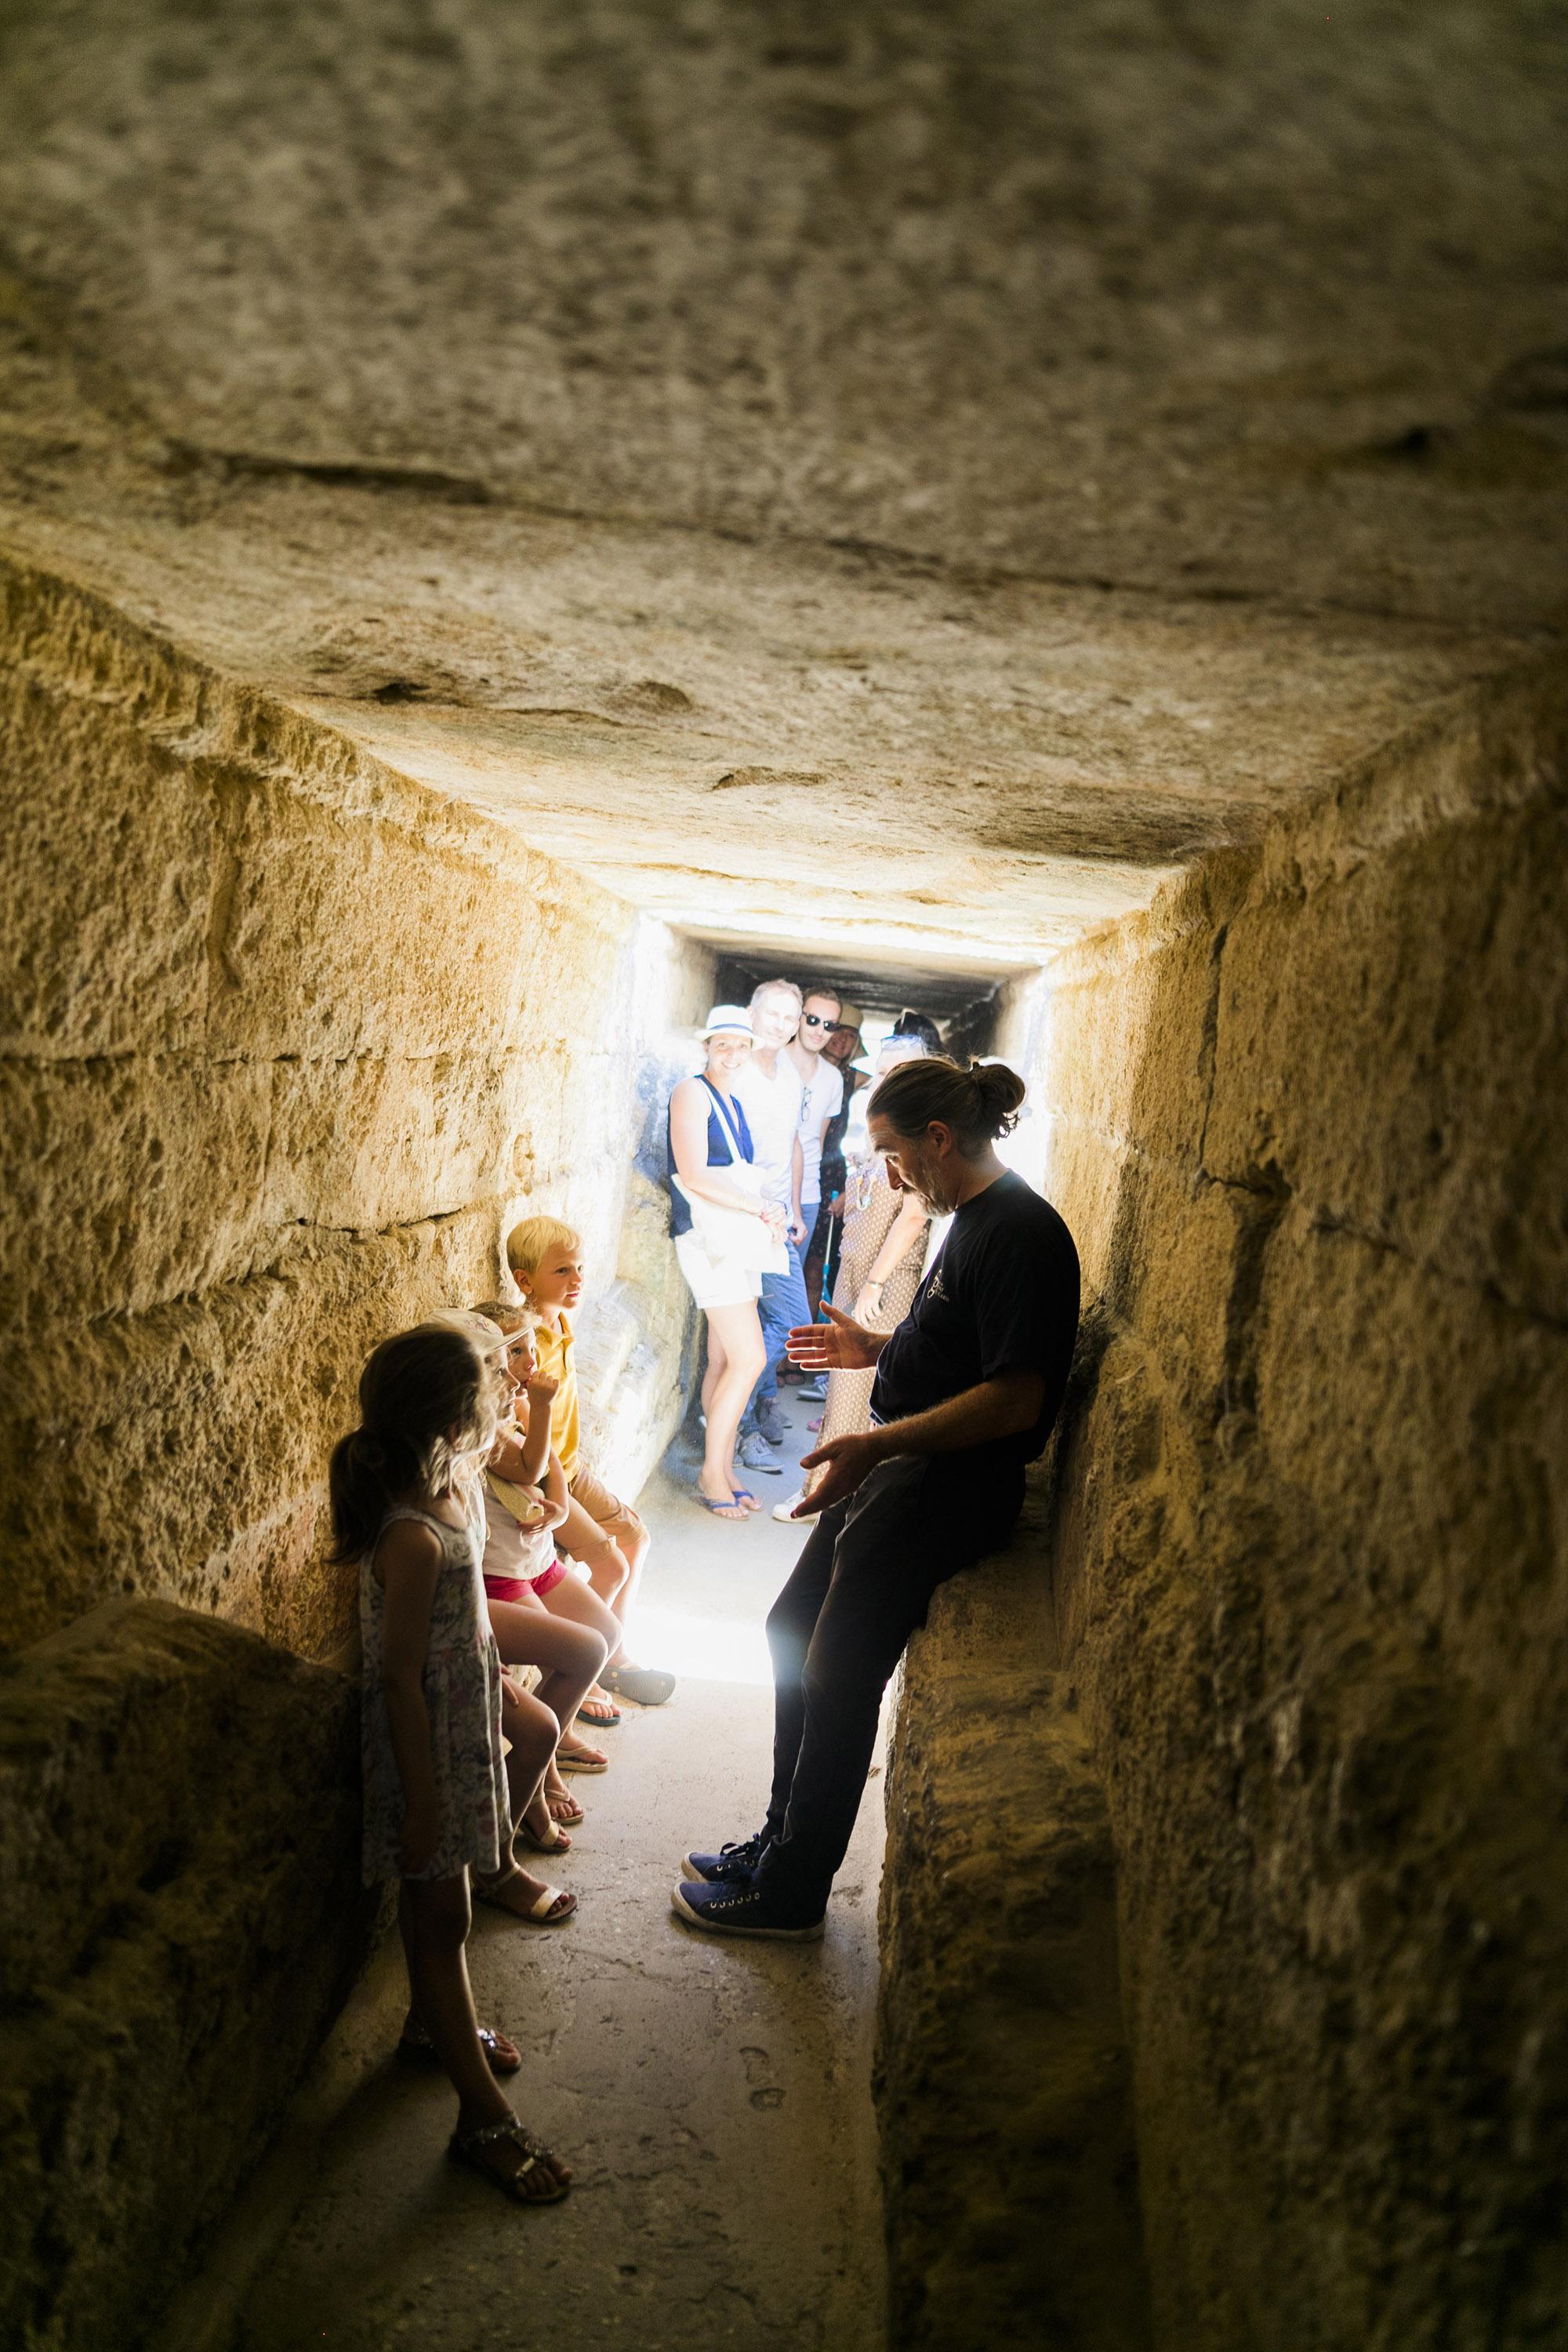 Discover the secrets of construction of the aqueduct with our guide. – © Aurelio Rodriguez